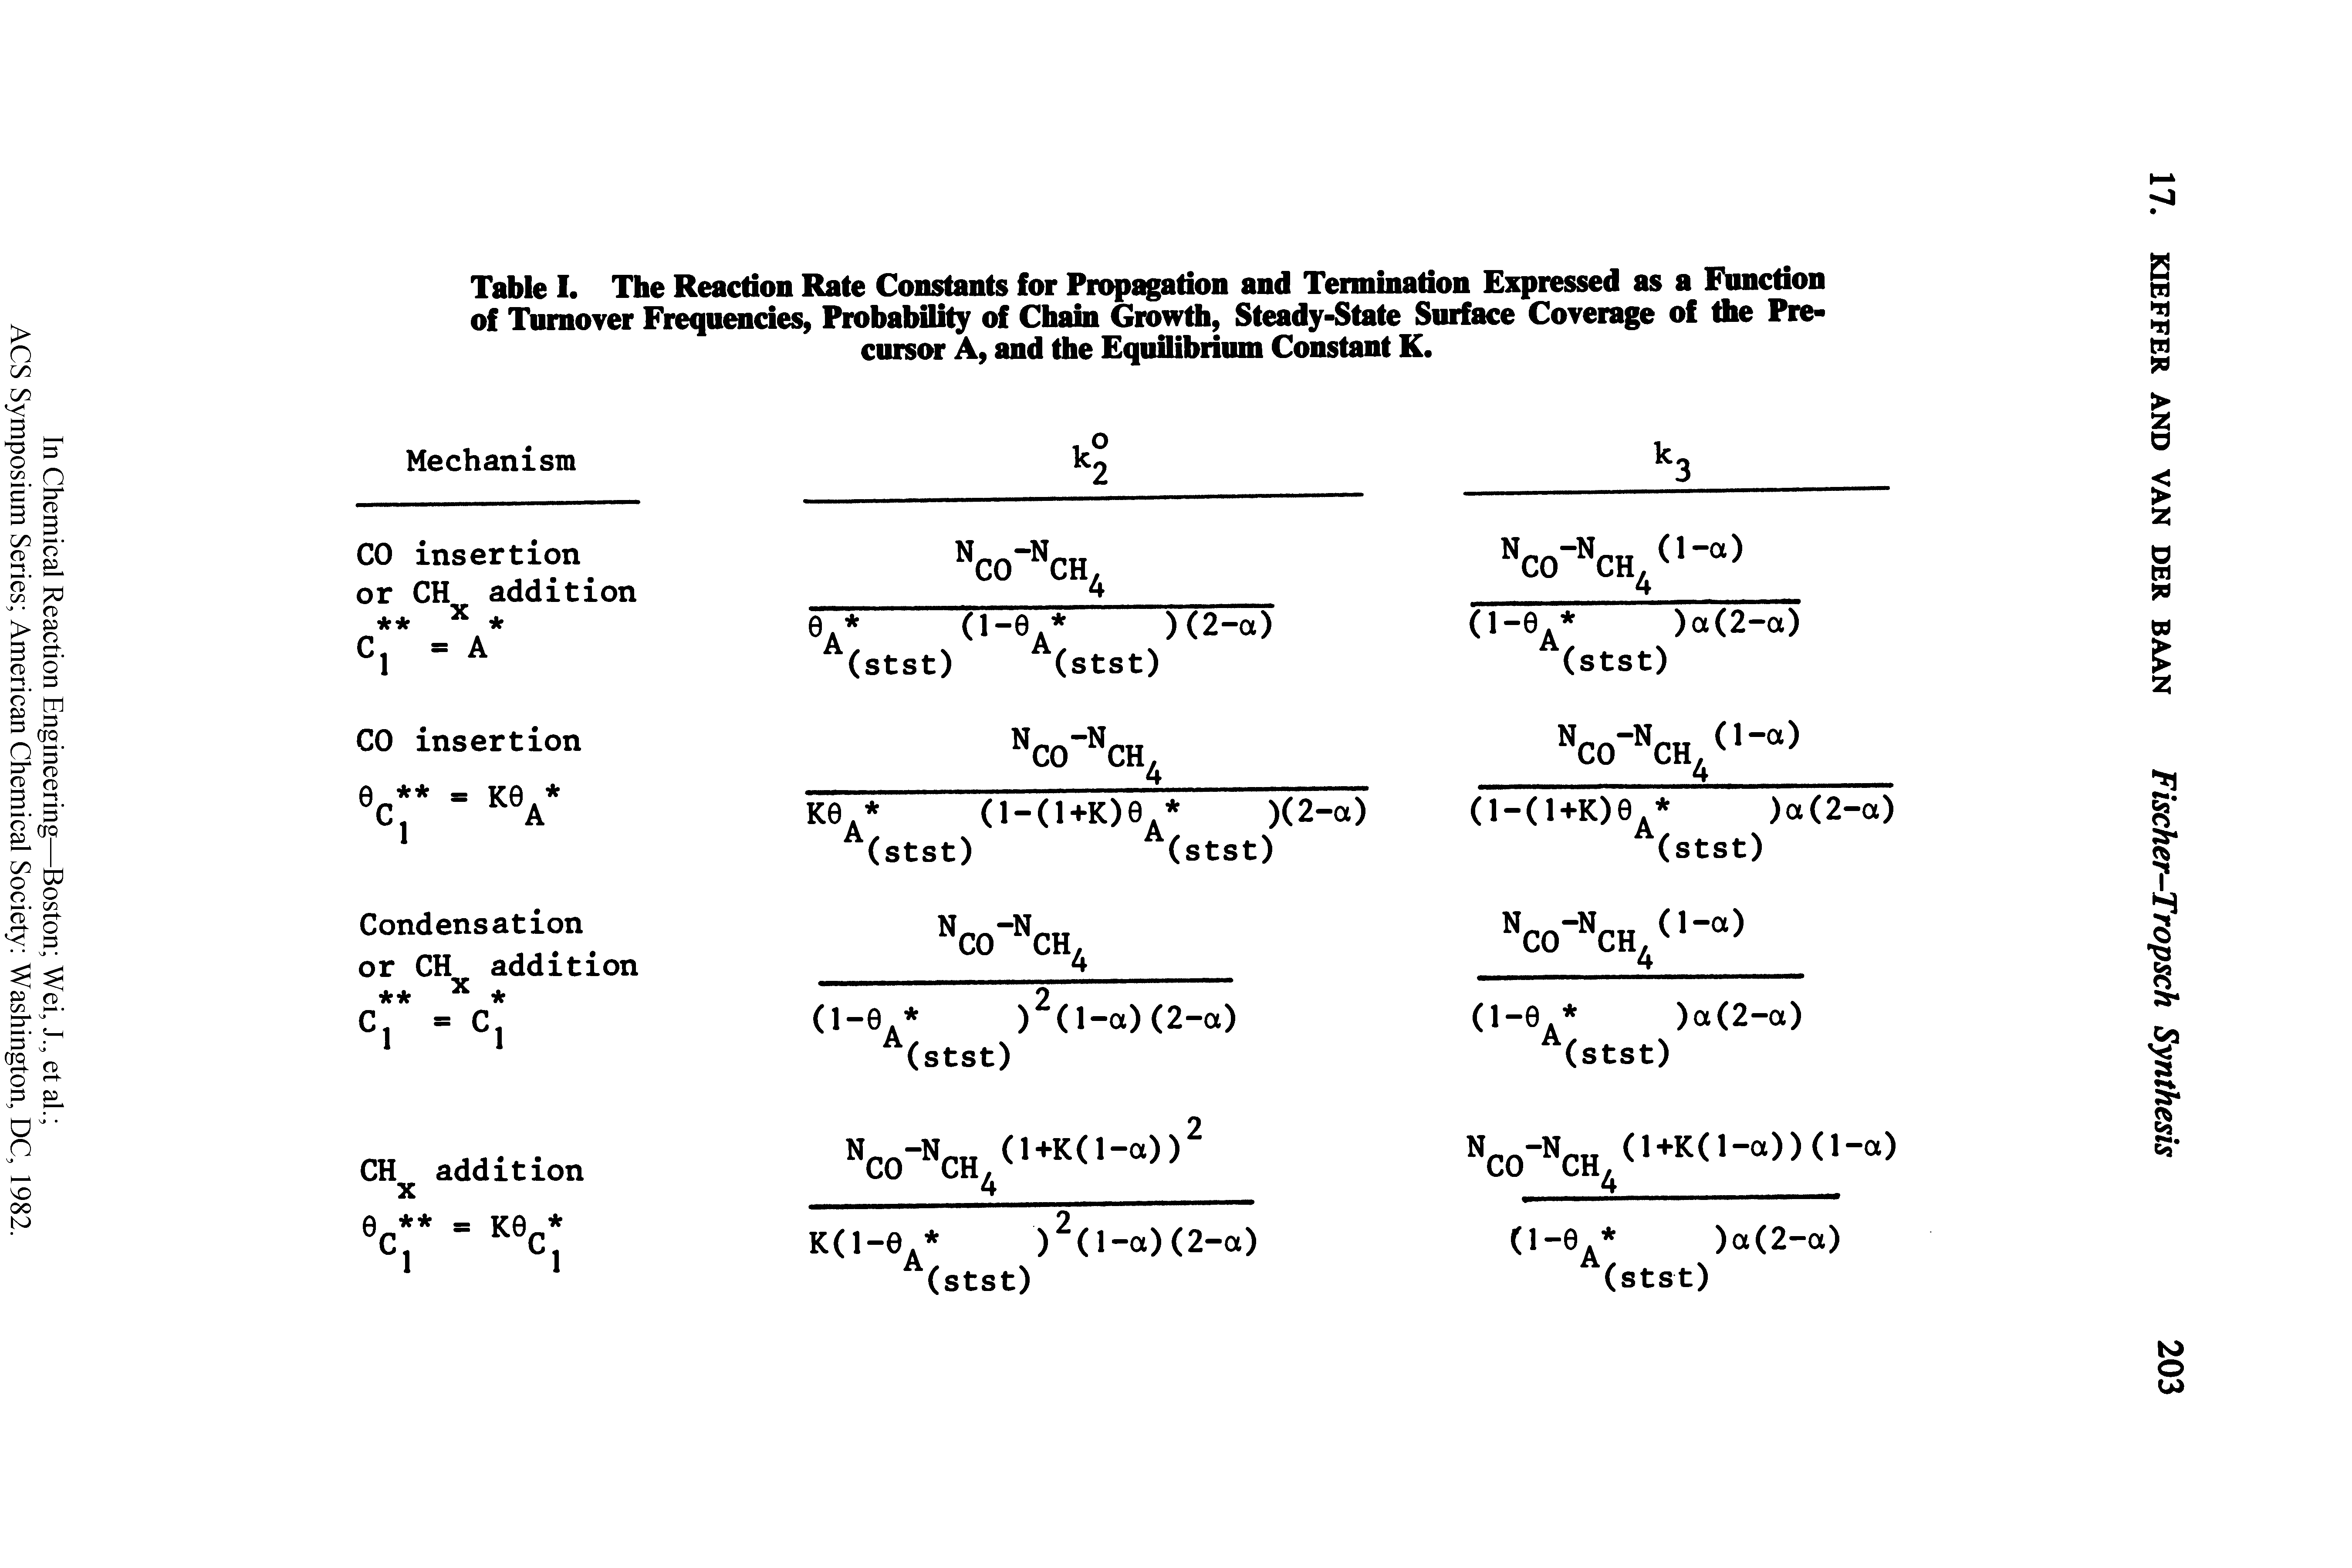 Table I. The Reaction Rate Constants for Propagation and Termination Expressed as a Function of Turnover Frequencies, Probability of Chain Growth, Steady-State Surface Coverage of the Precursor A, and the Equilibrium Constant K.